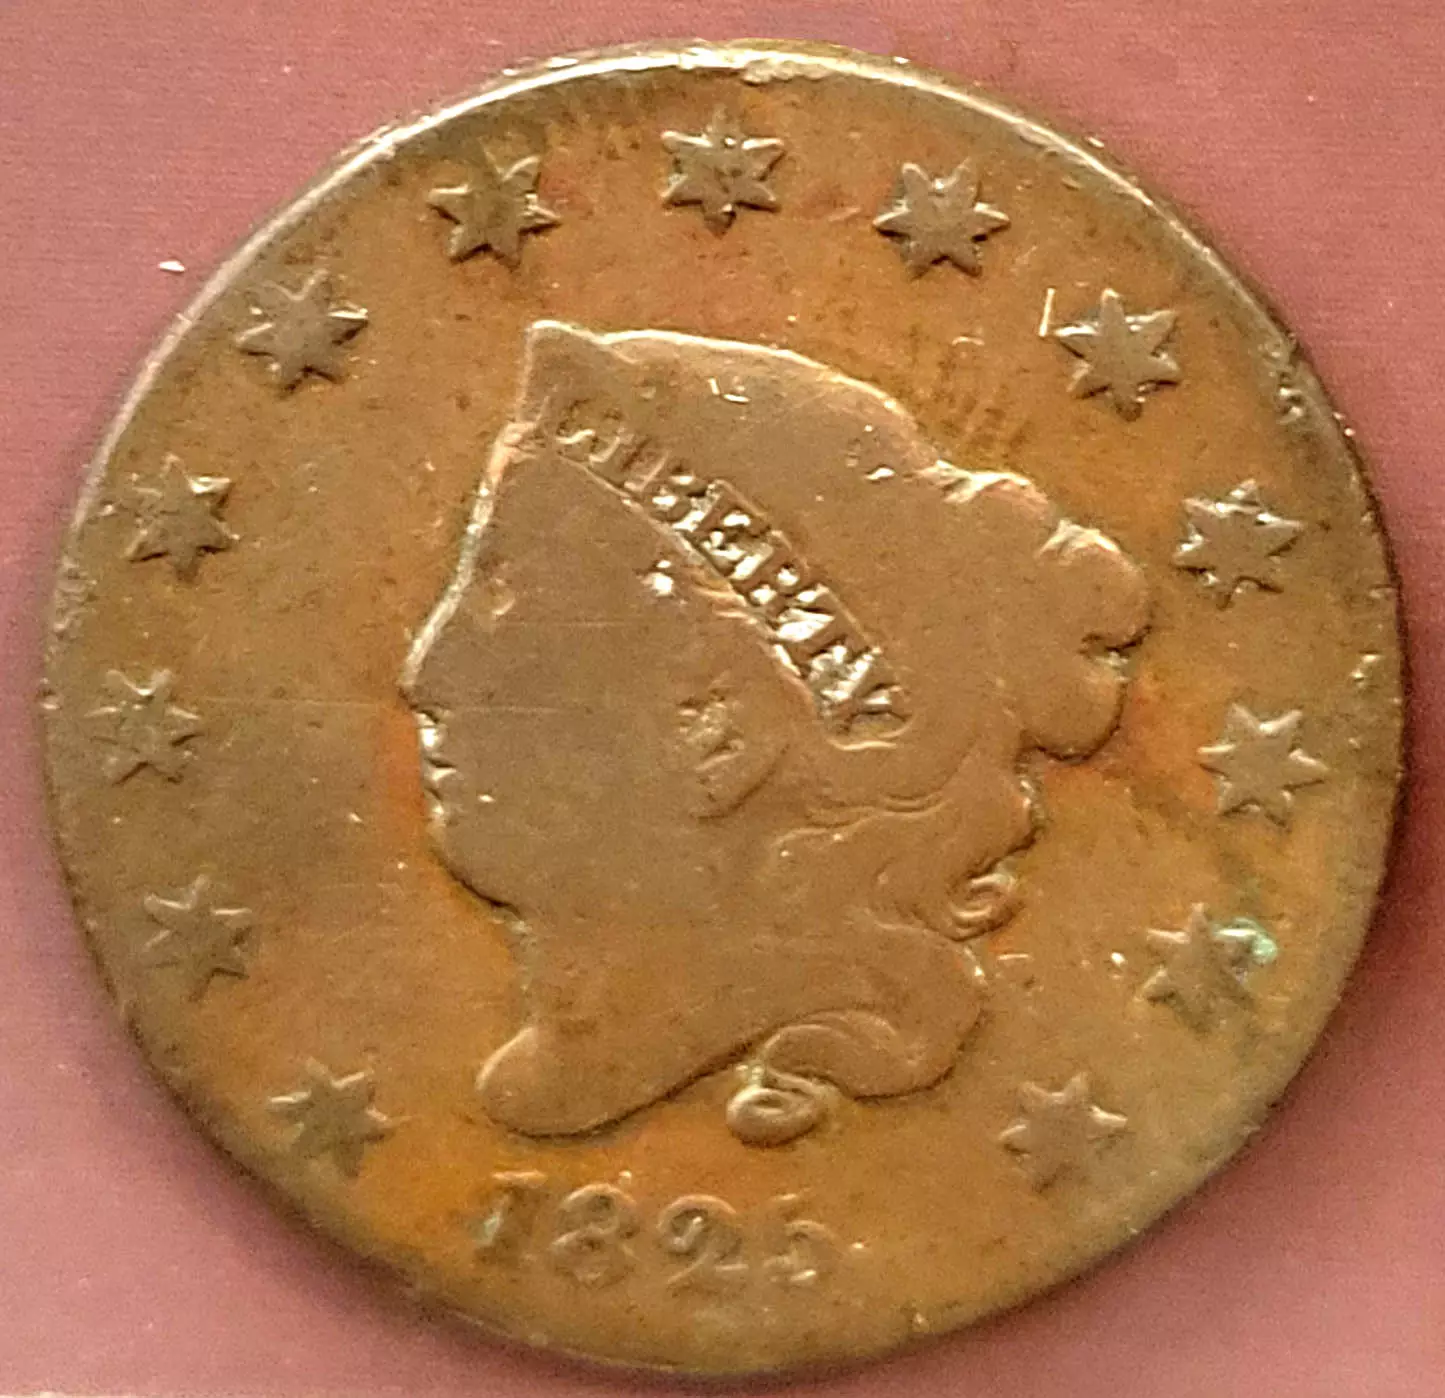 Photo of a worn US Liberty large cent from 1825